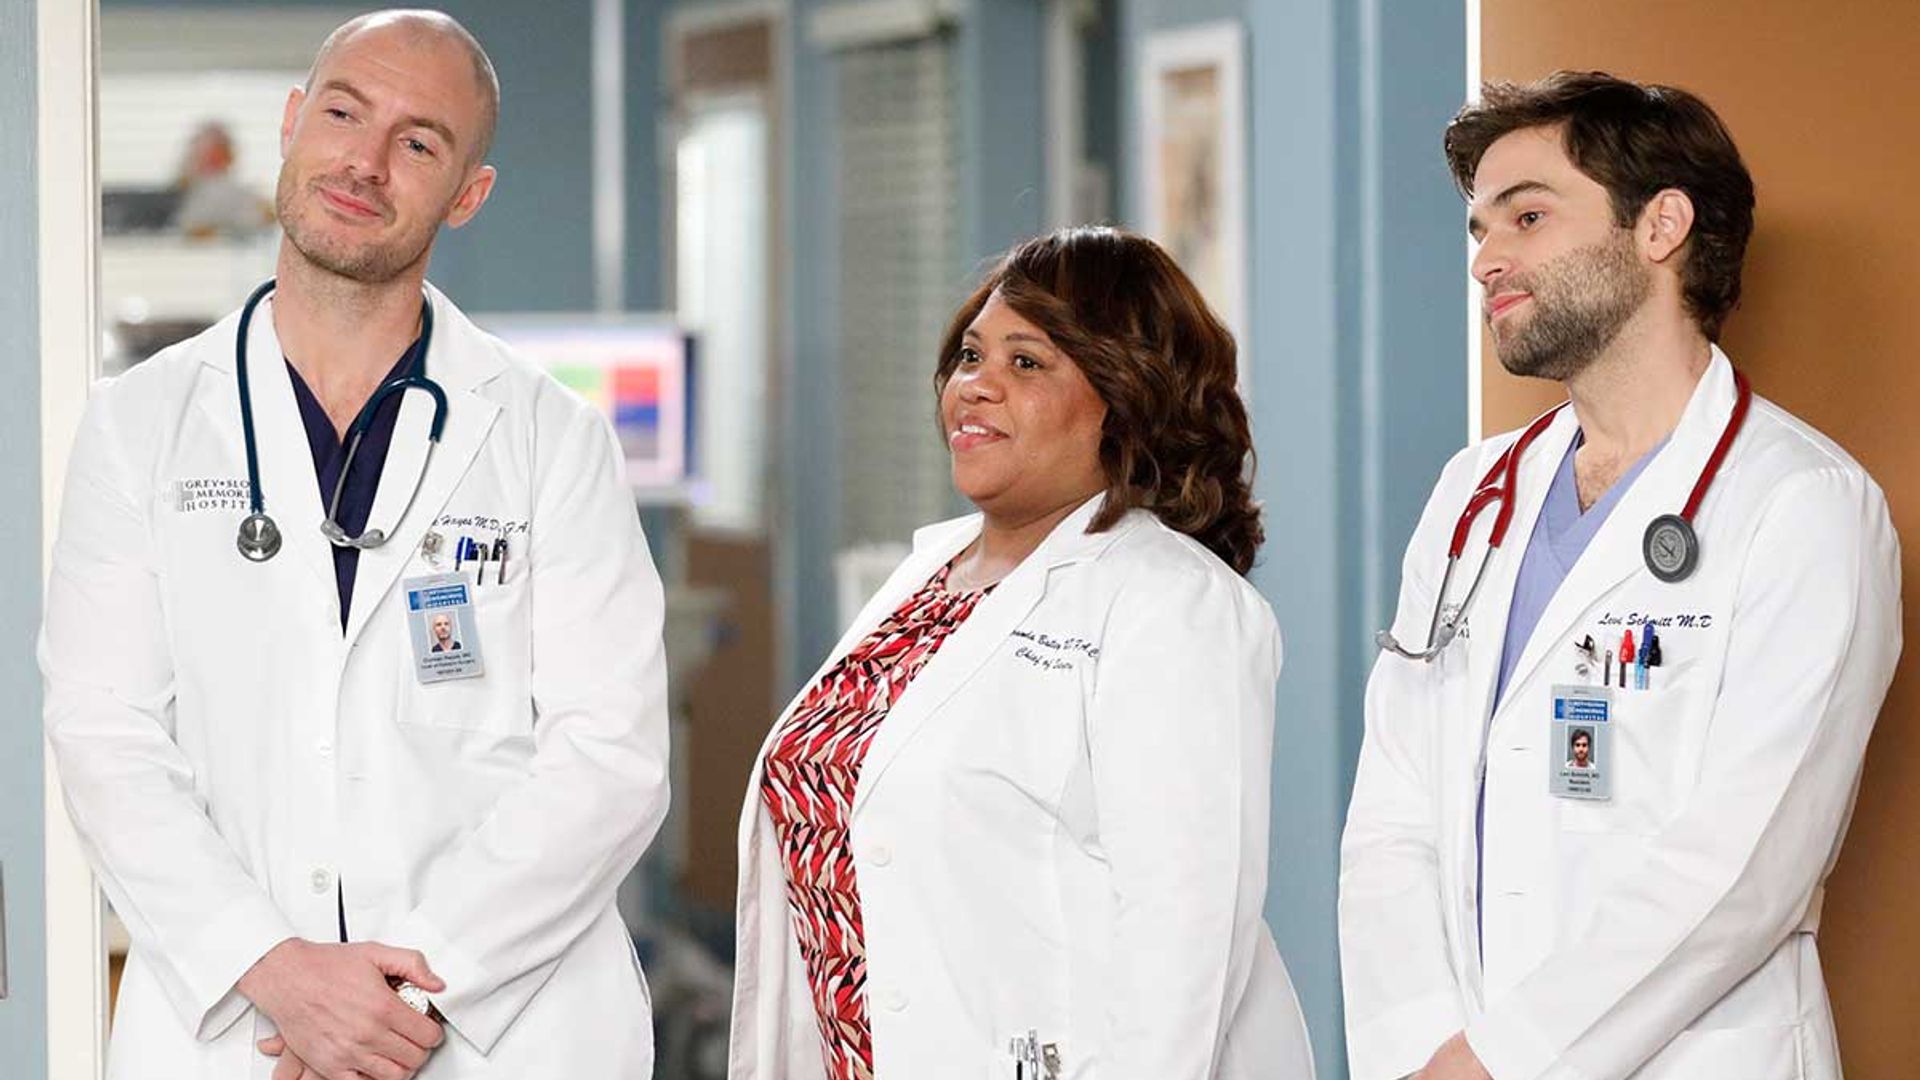 Grey's Anatomy fans mourn as another major character exits the show